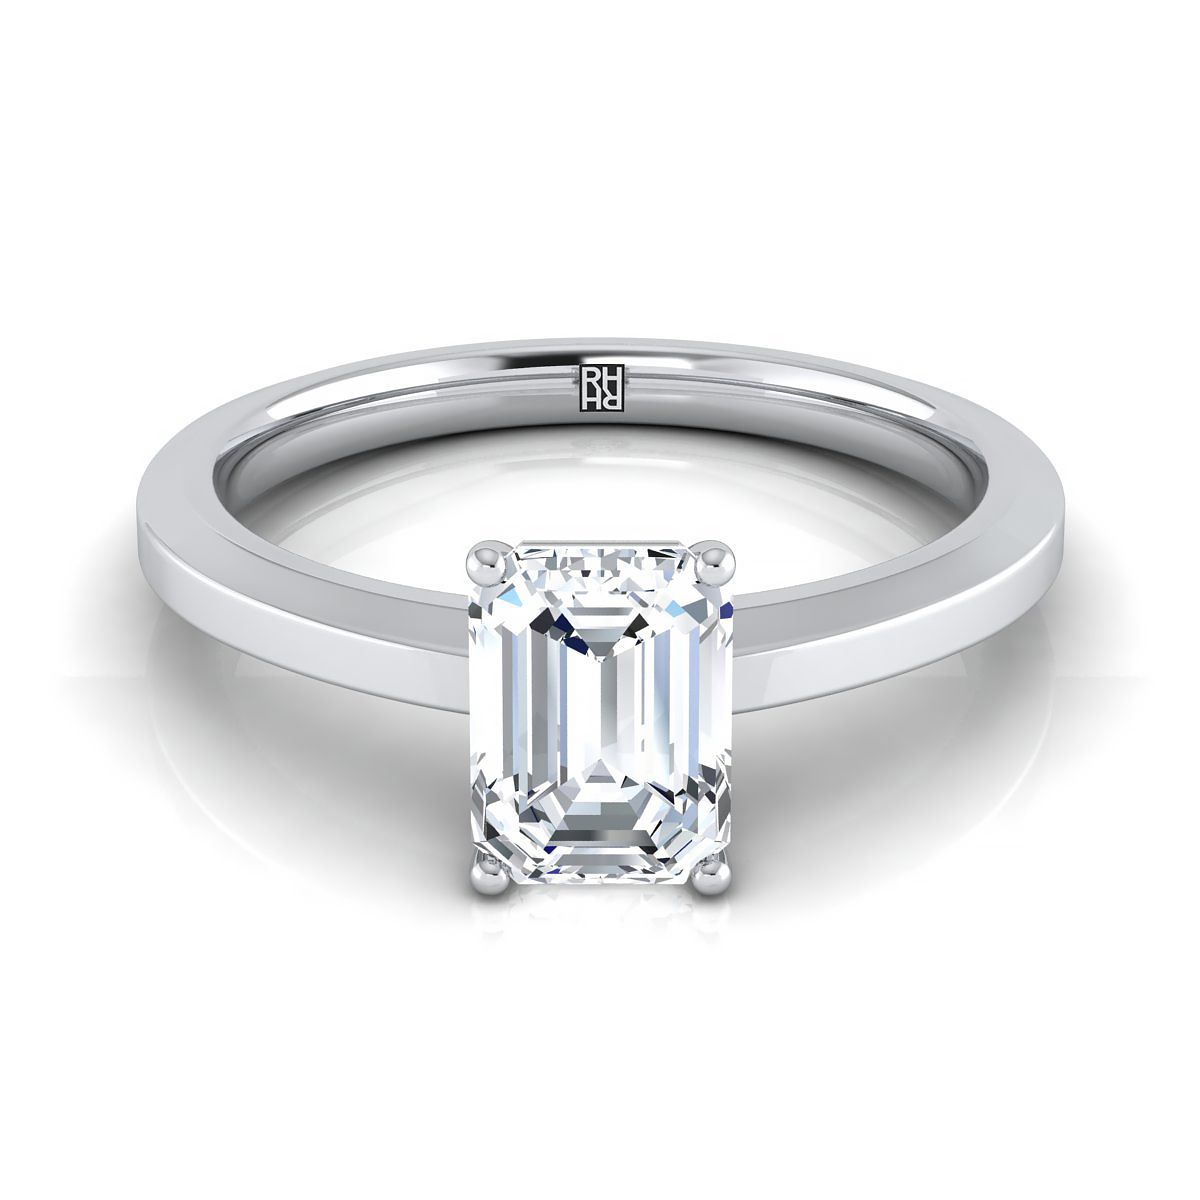 14K White Gold Emerald Cut  Beveled Edge Comfort Style Bright Finish Solitaire Engagement Ring